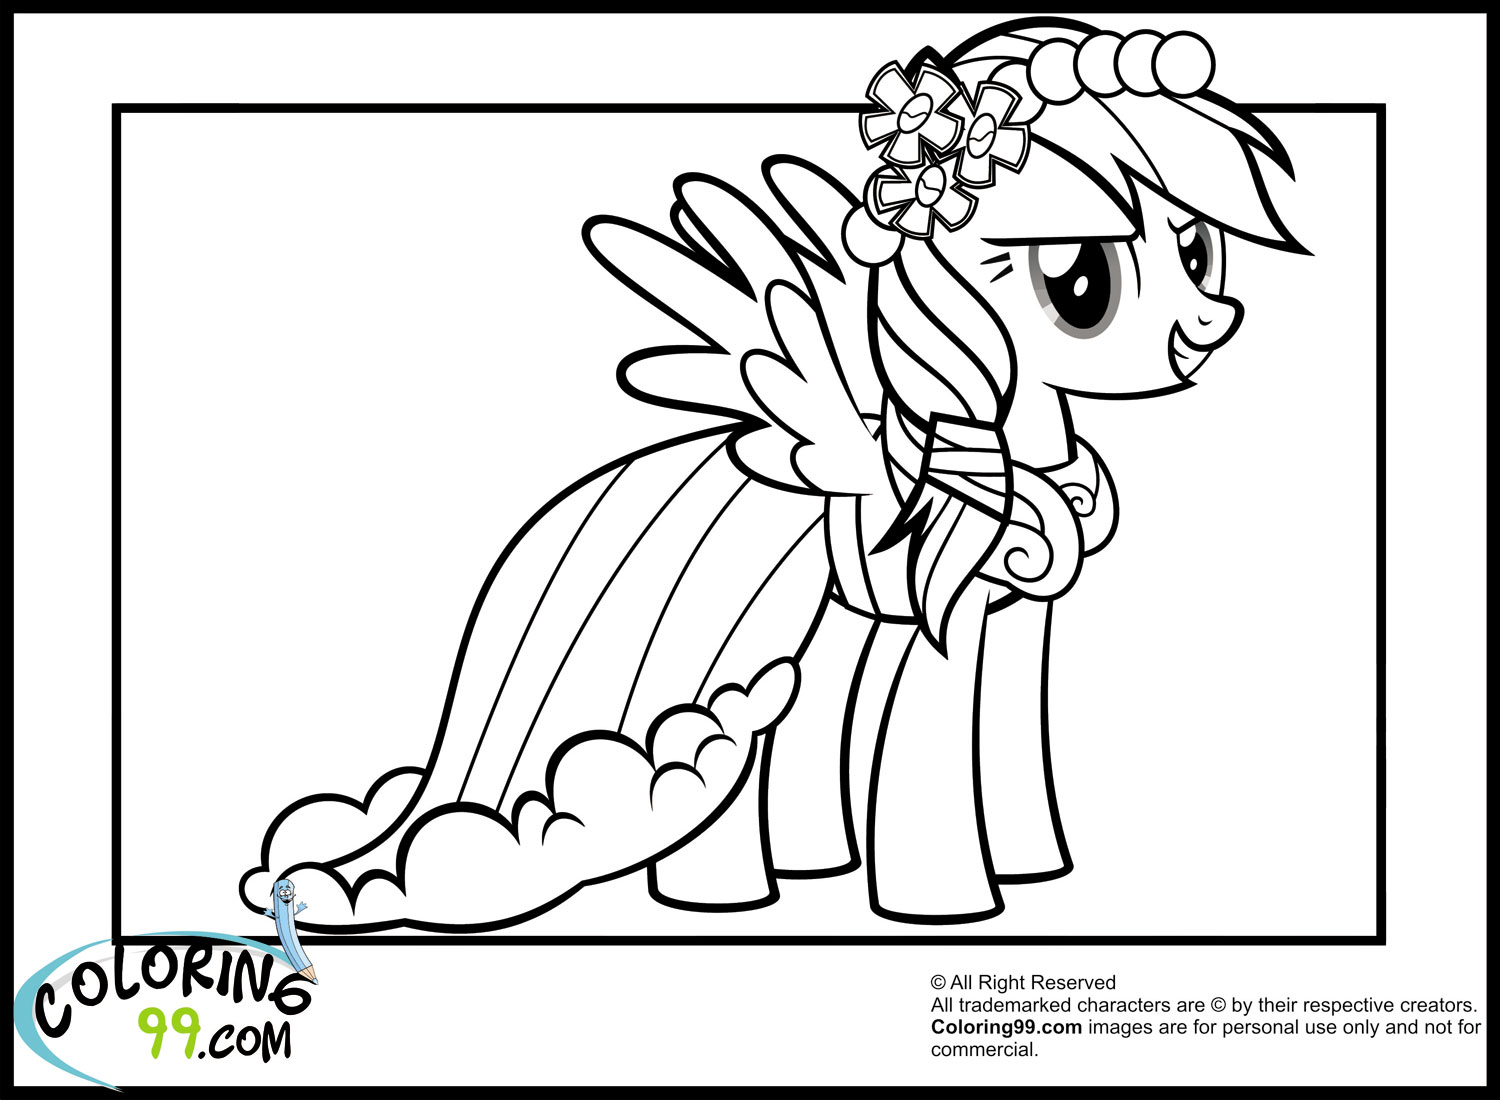  Rainbow  Dash  Coloring  Pages  Team colors